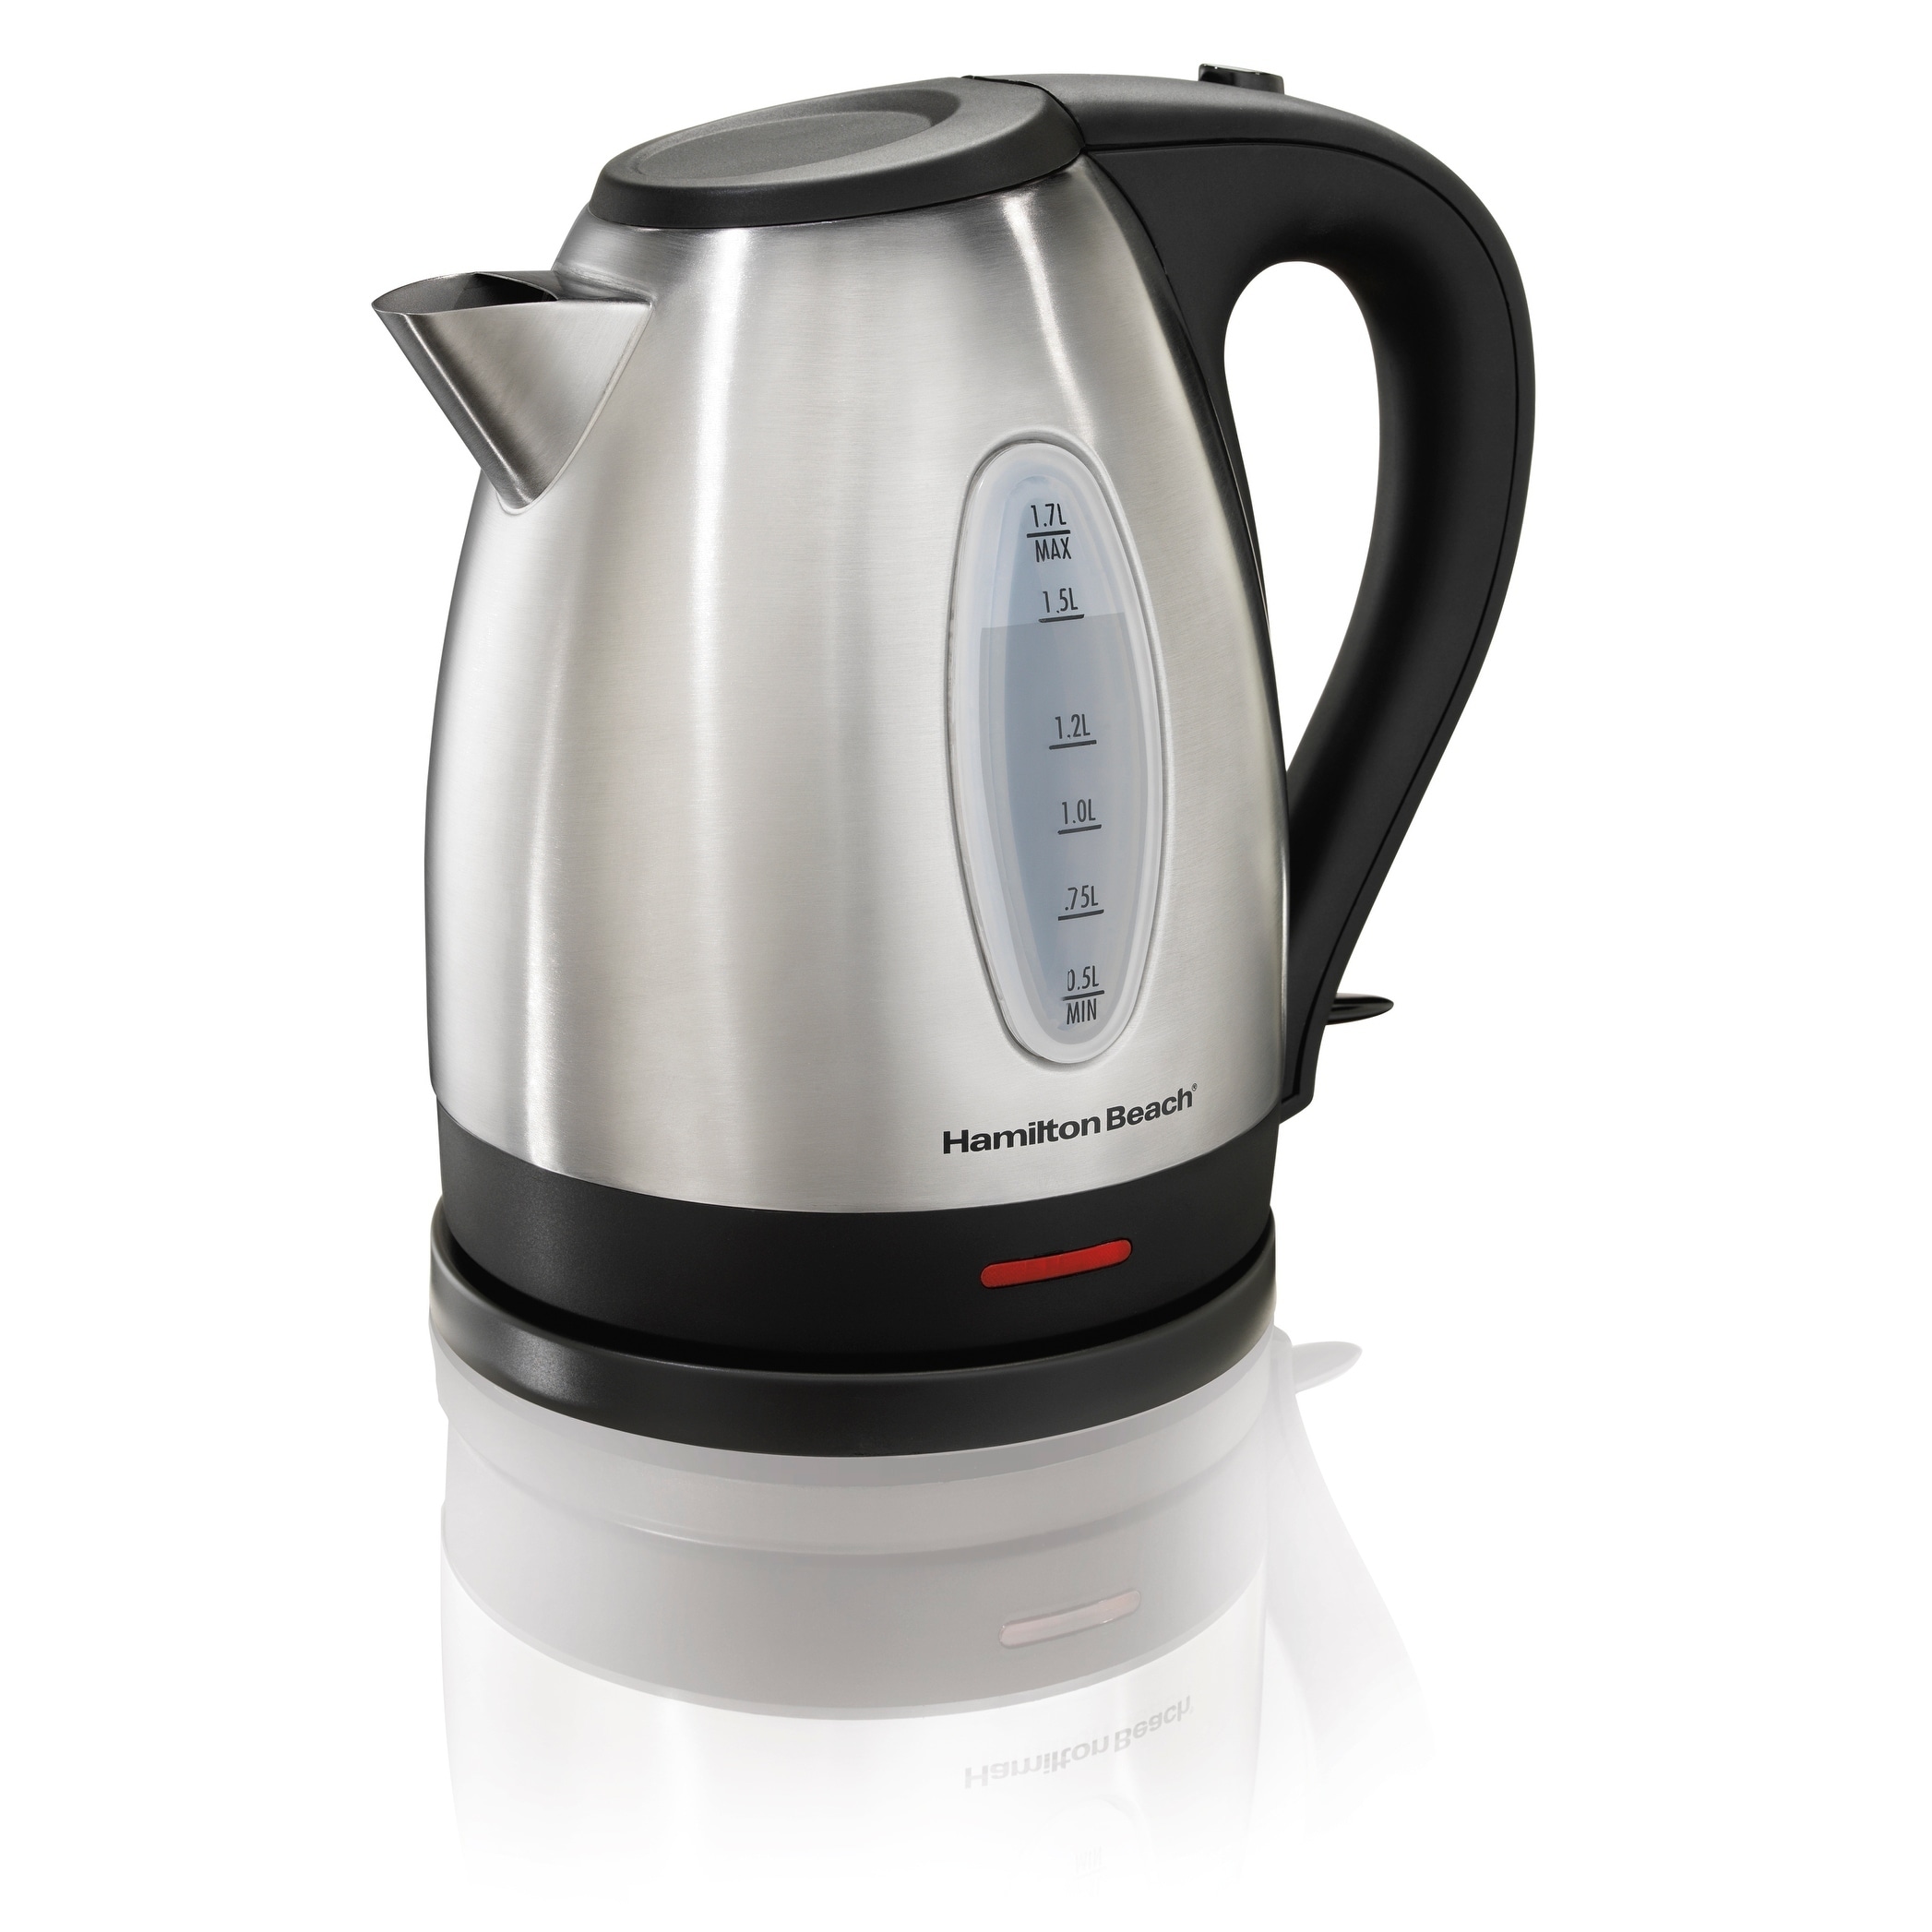 Brentwood KT-1900W 1.7L Cordless Glass Electric Kettle, White - Brentwood  Appliances